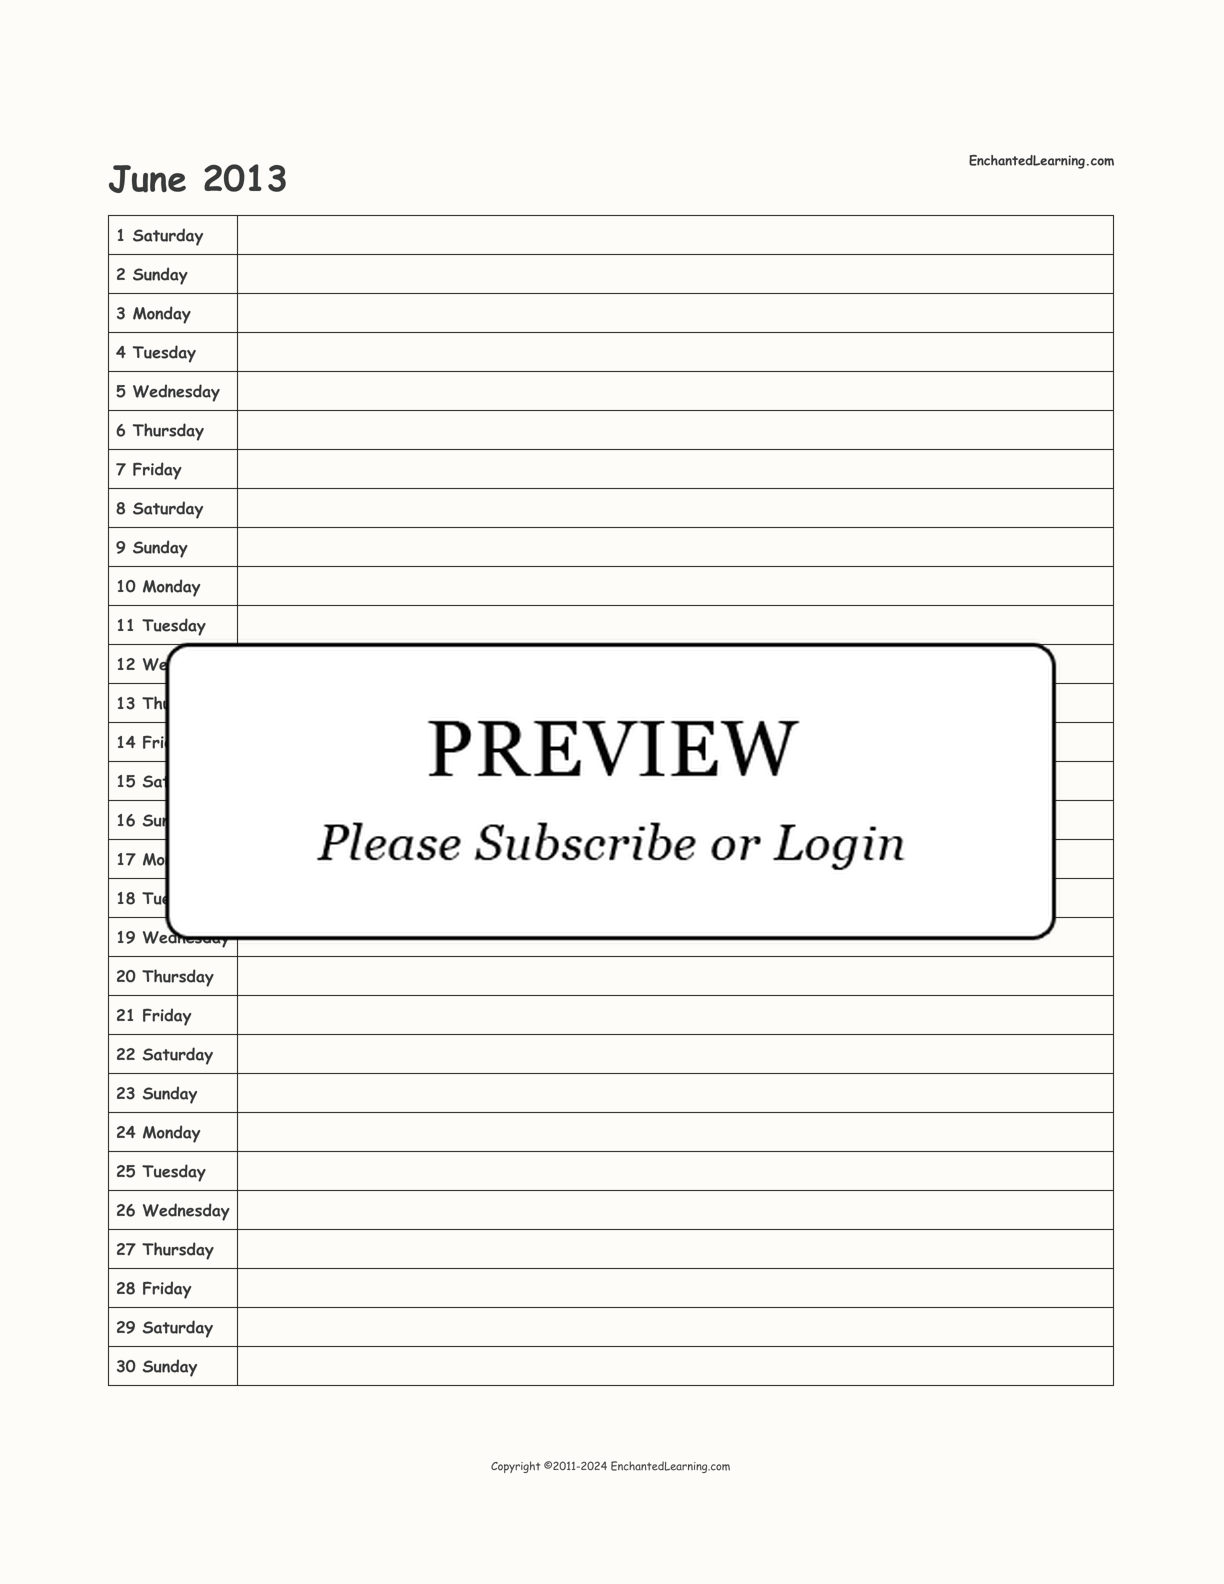 2013 Scheduling Calendar interactive printout page 6